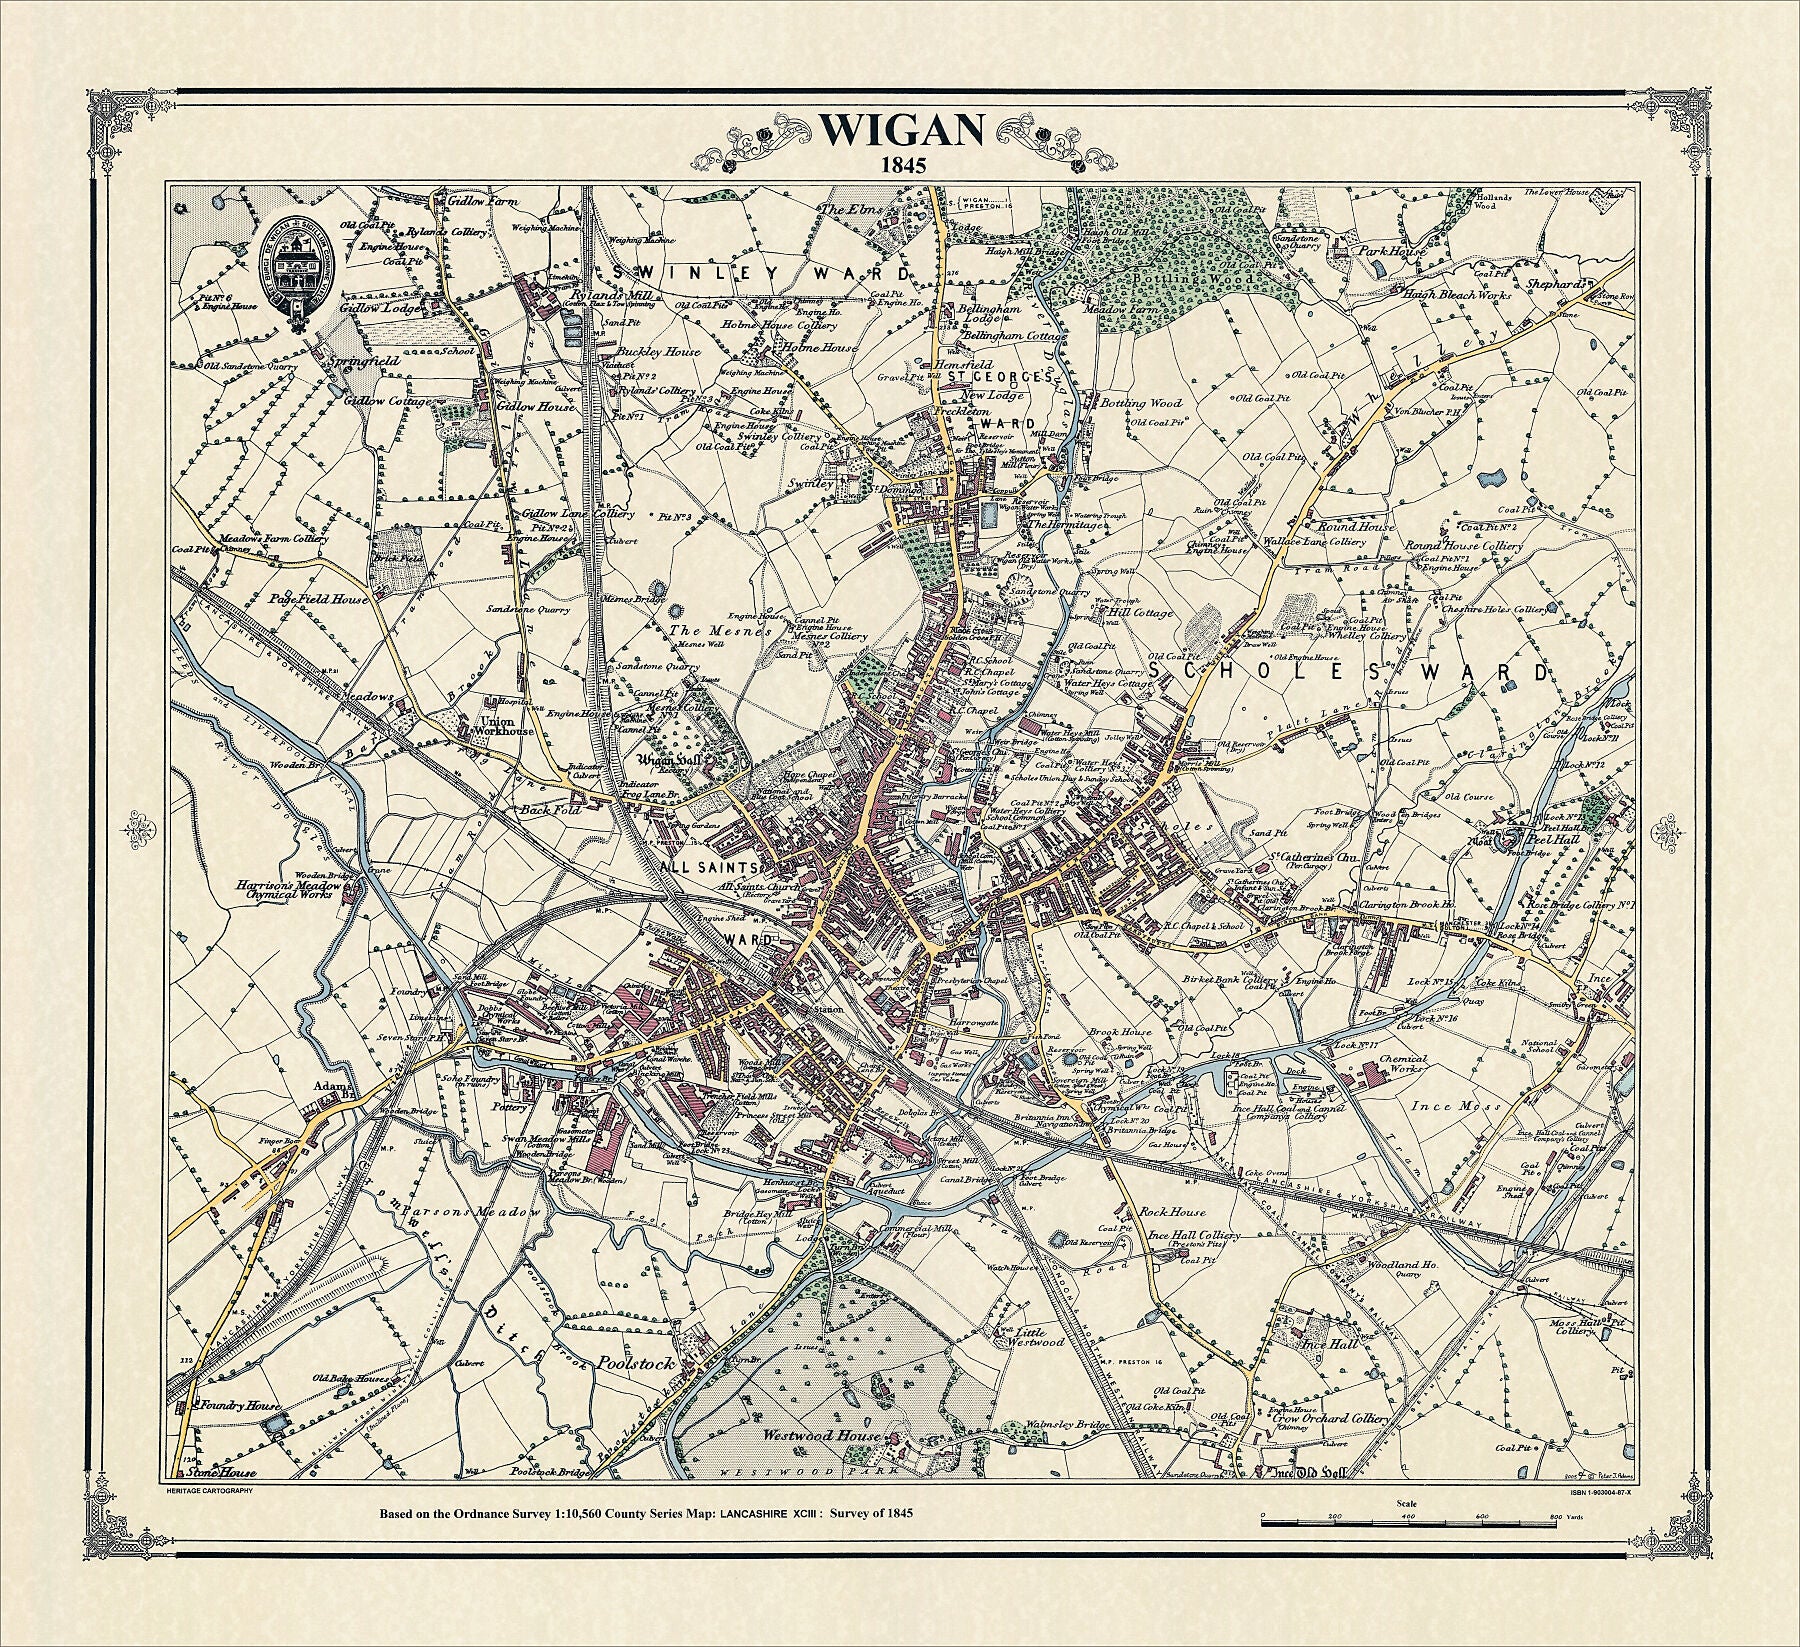 Coloured Victorian map of Wigan in 1845 by Peter J Adams of Heritage Cartography